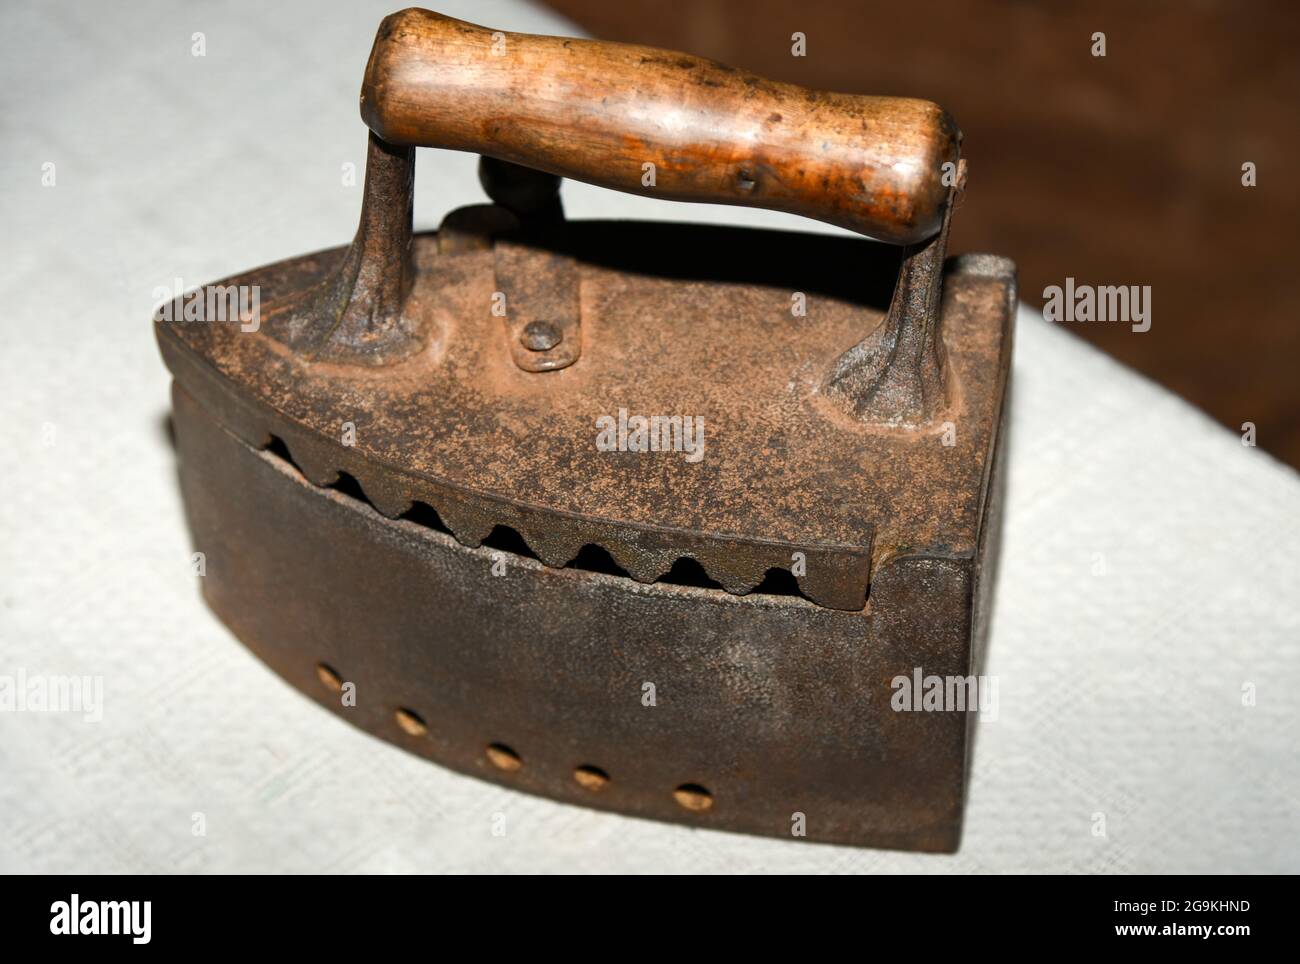 Old charcoal iron for ironing clothes Stock Photo - Alamy